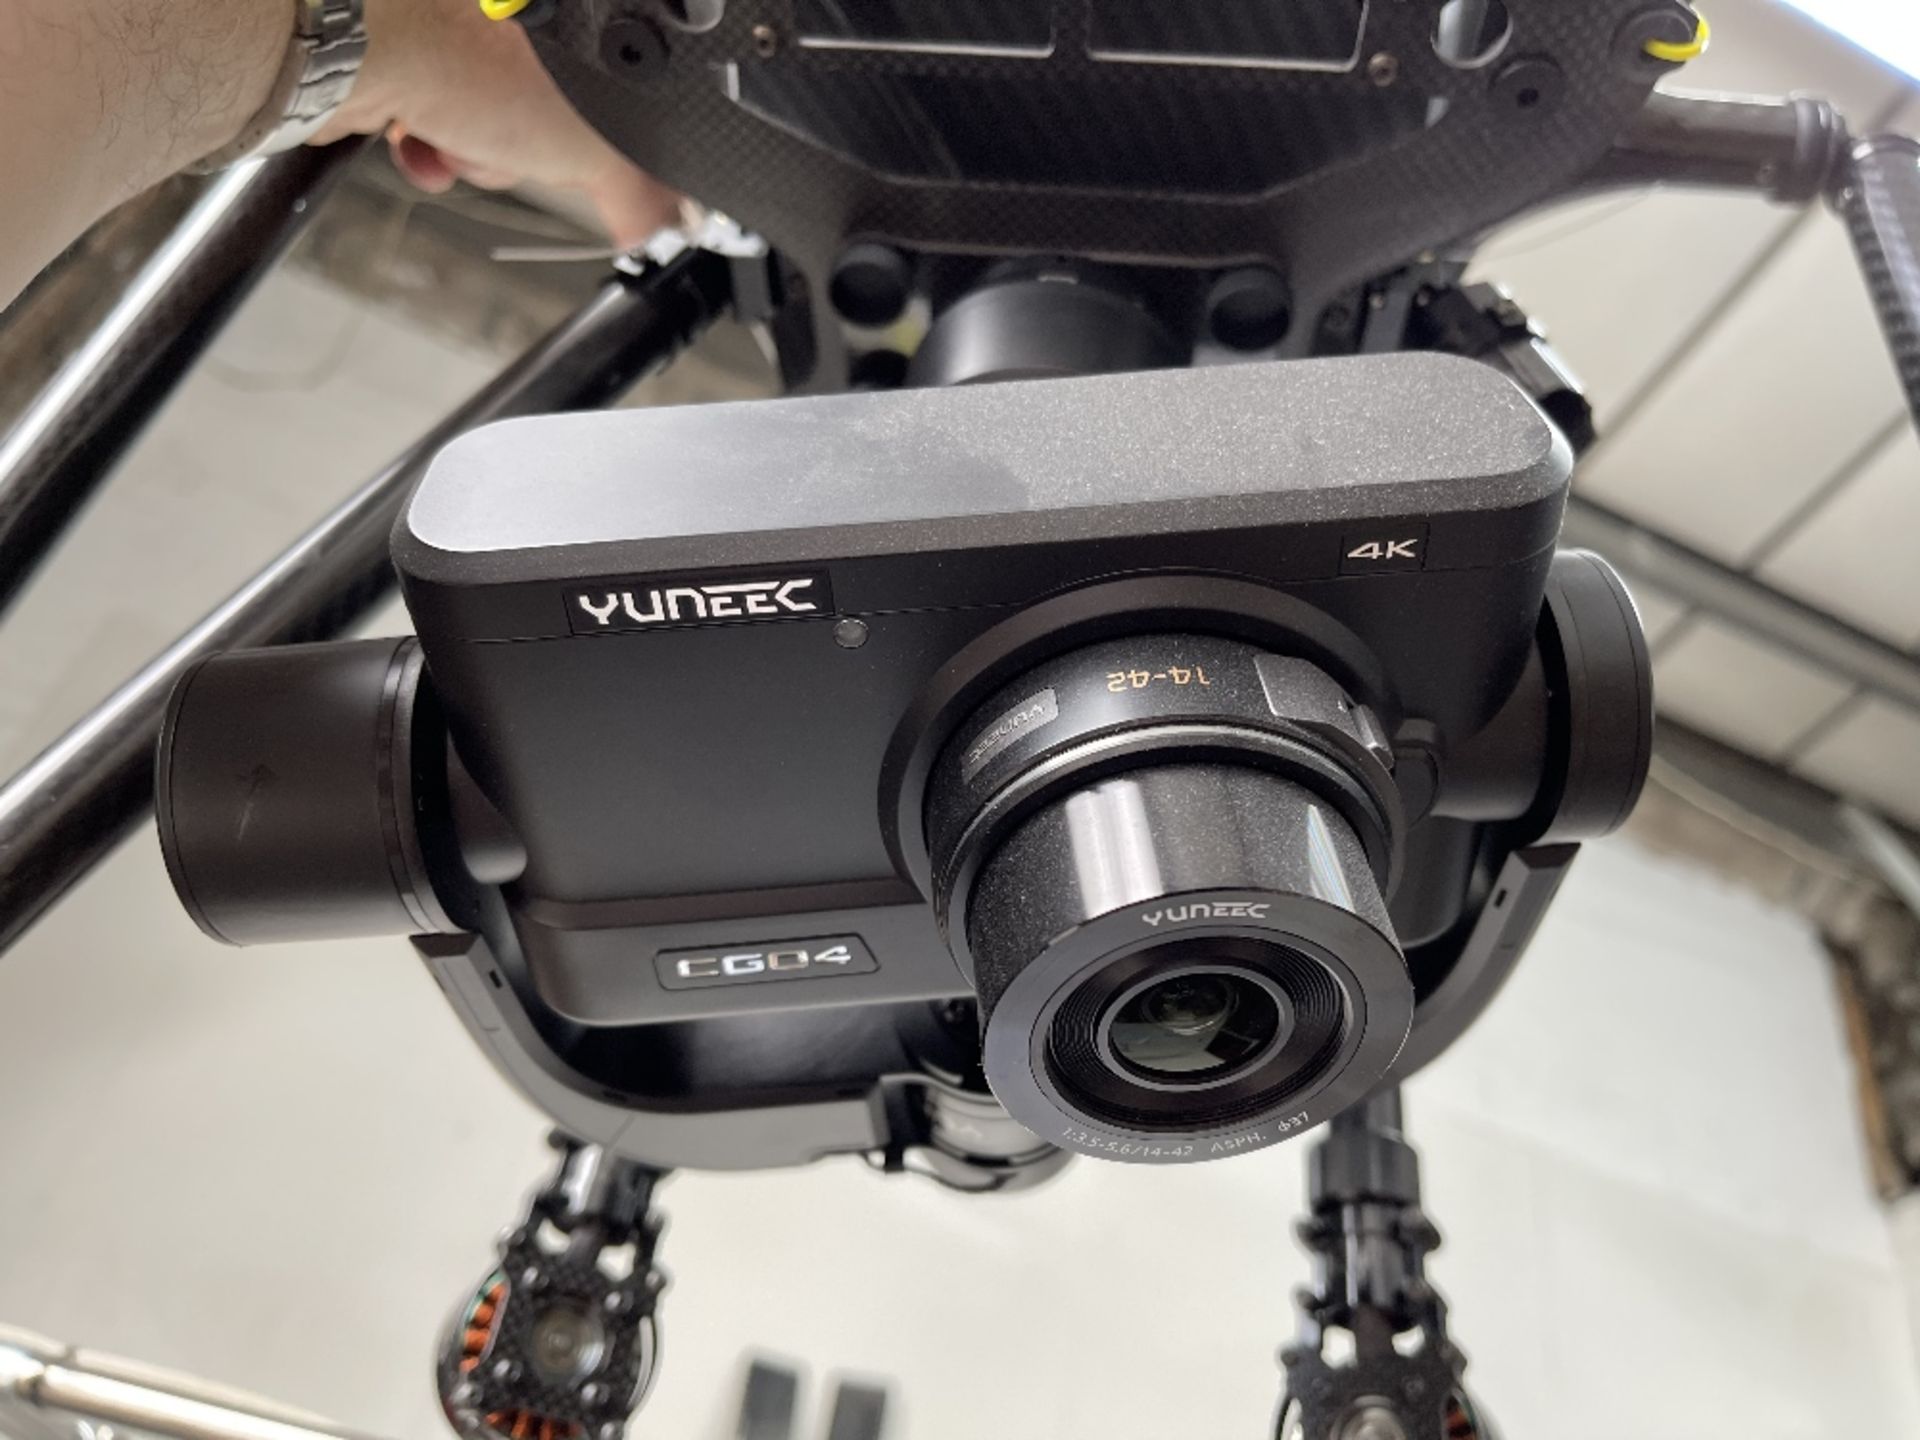 Yuneec Tornado H920 drone YOM 2018 and accessories as listed - Image 13 of 35